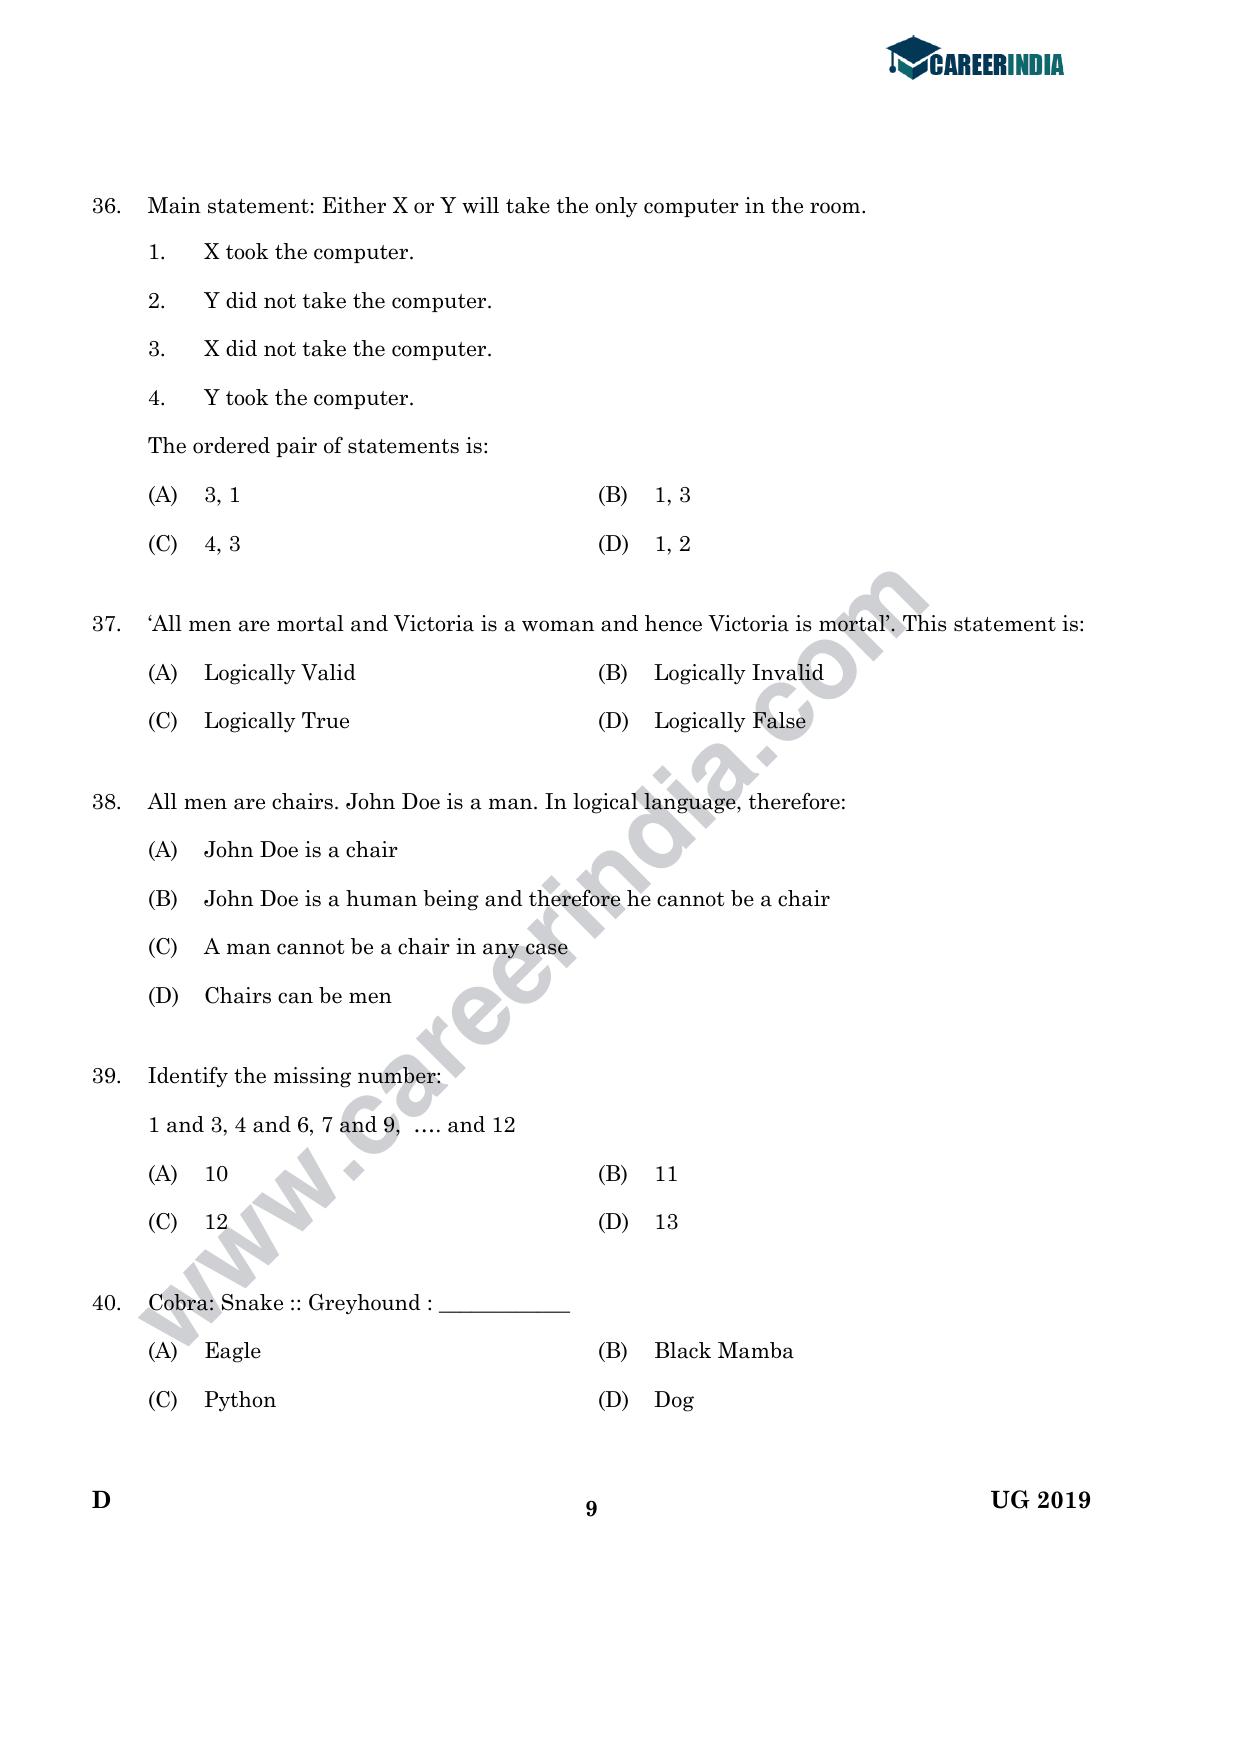 CLAT 2019 UG Logical-Reasoning Question Paper - Page 8